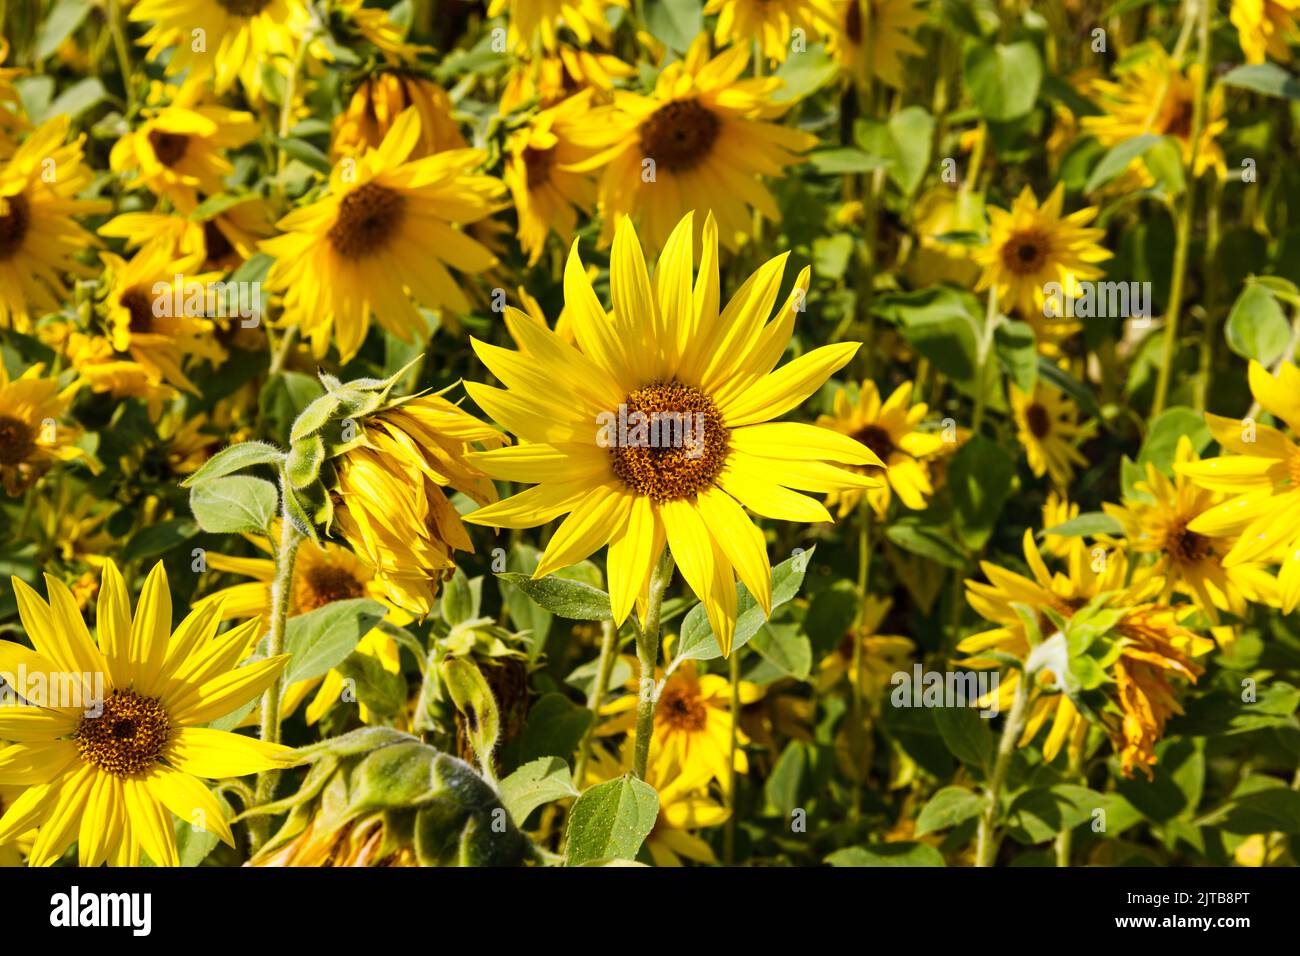 Close up of an agricultural field with yellow sunflowers Stock Photo